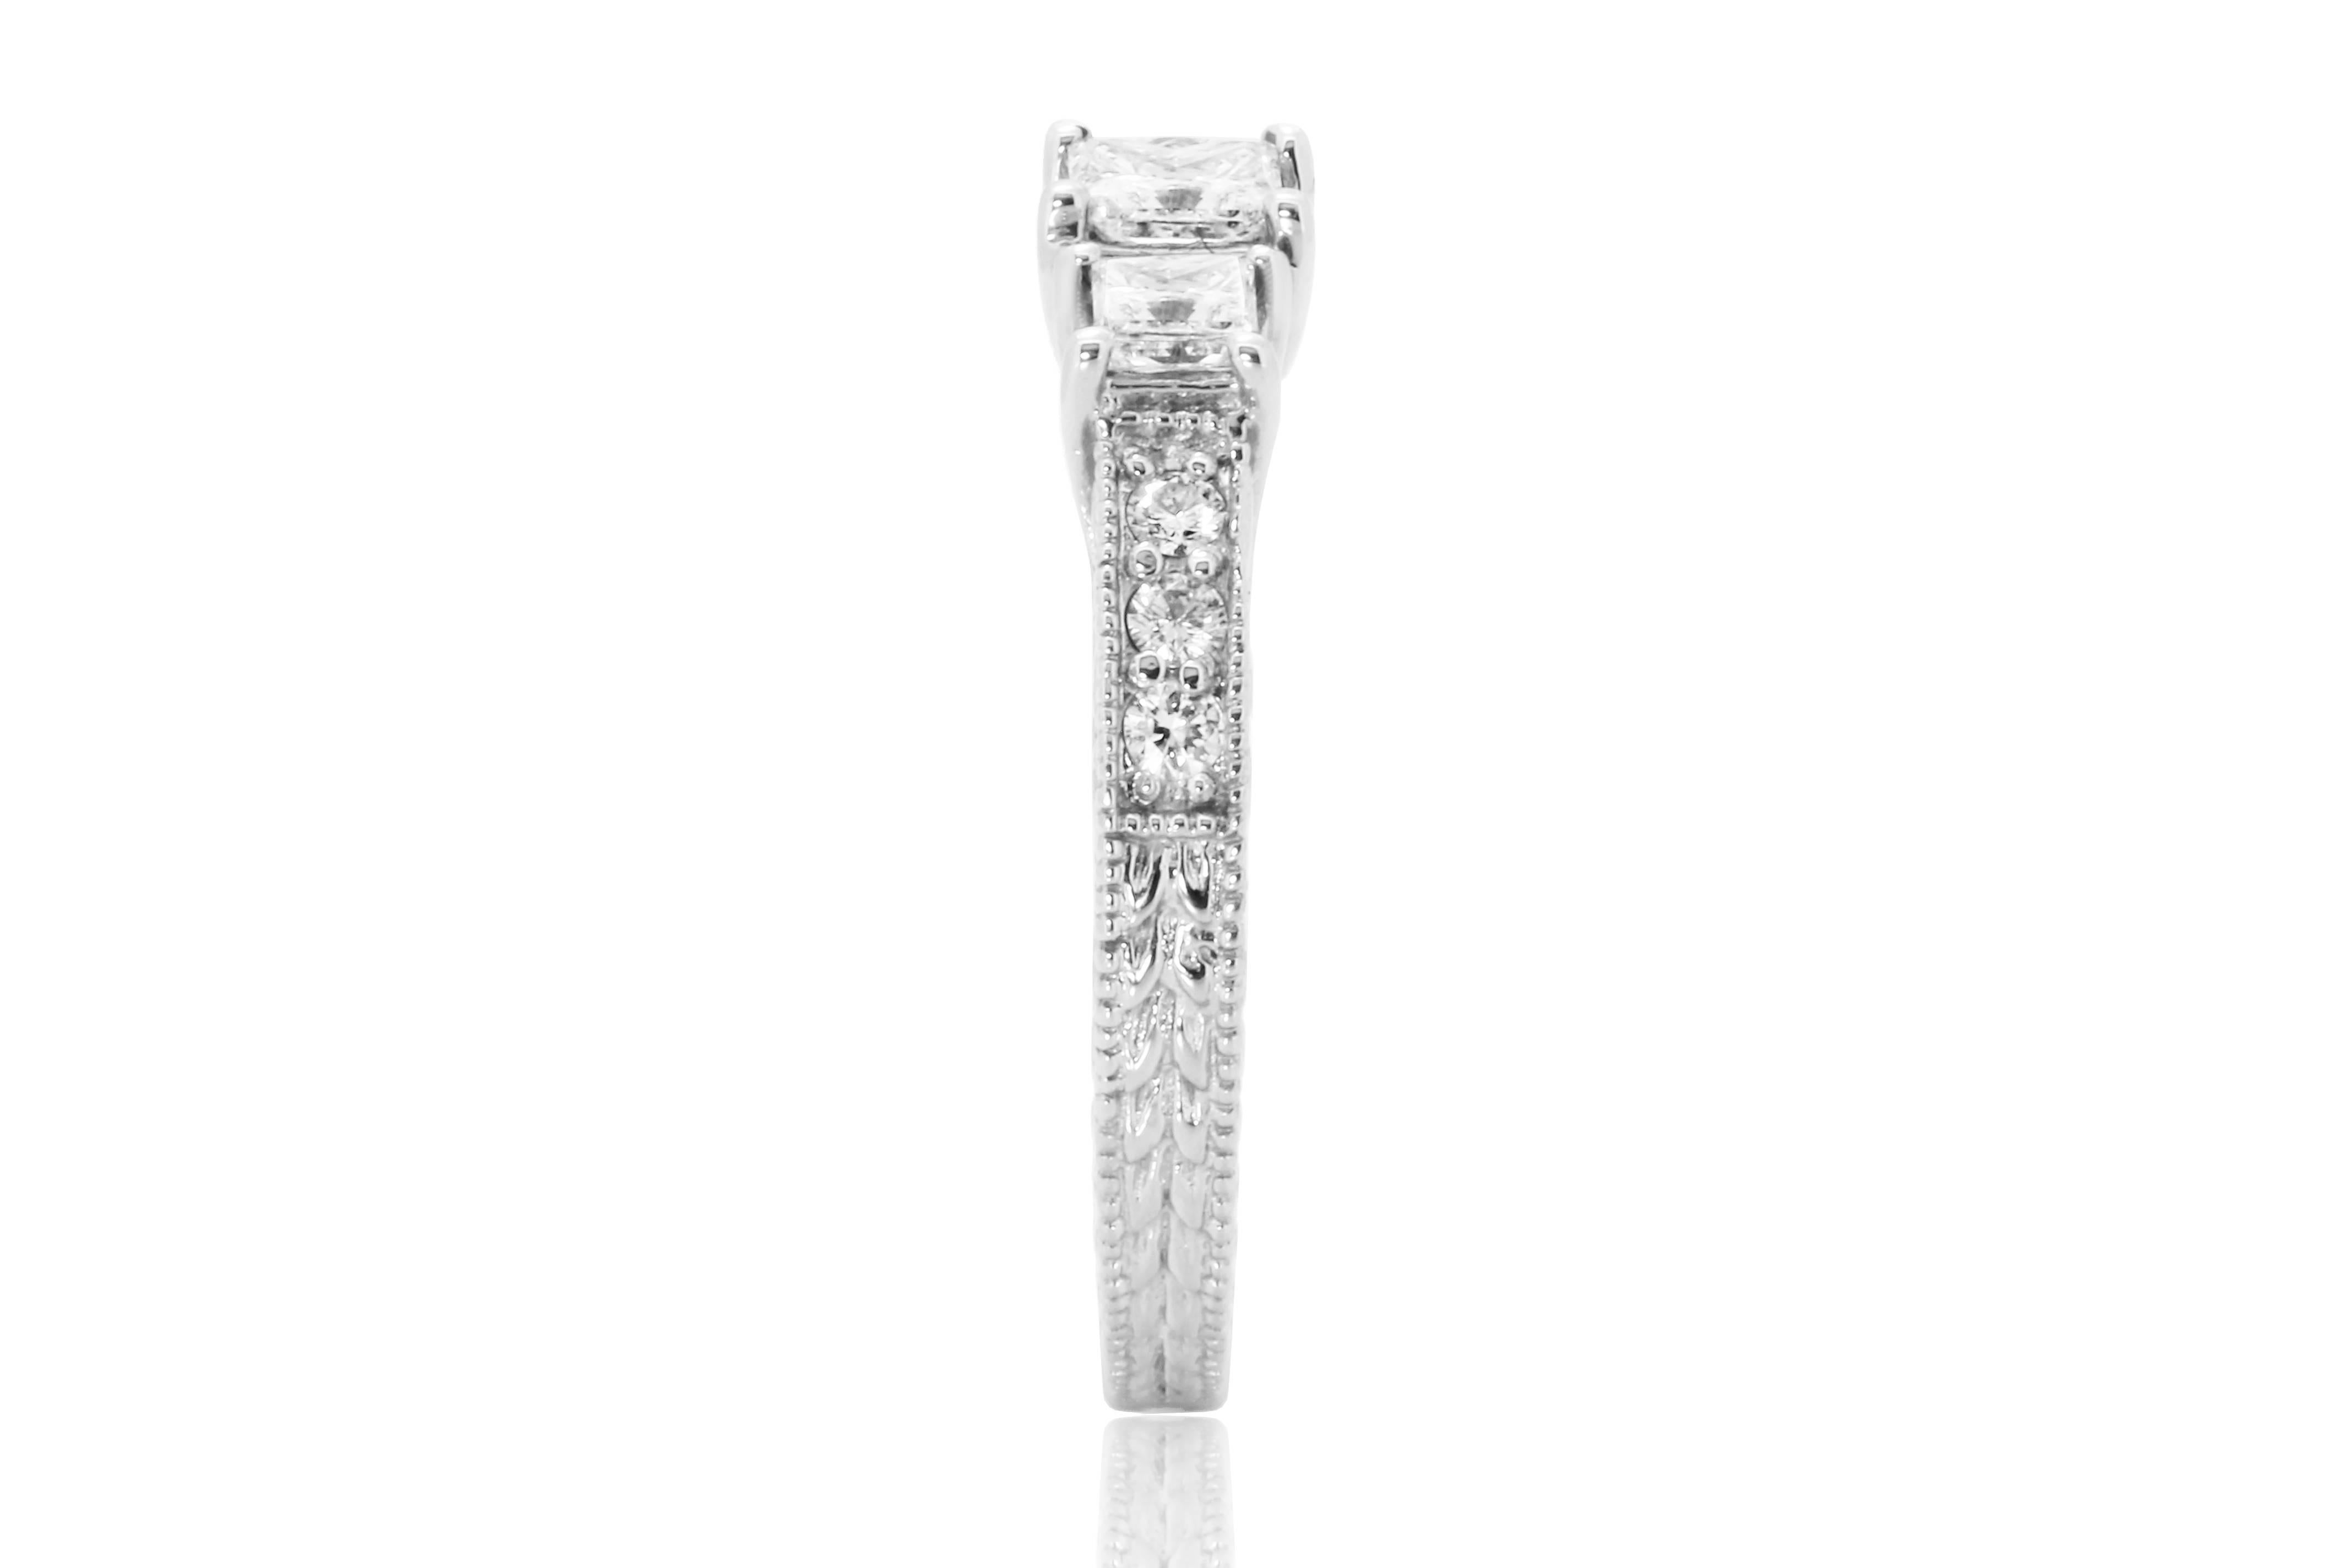 Very Beautiful Three Stone Princess Cut White Diamond 0.63 Carat flanked with 6 white diamond round 0.12 Carat in 14k White Gold Ring with Milgrain and carving.

MADE IN USA
Total Diamond Weight 0.75 Carat